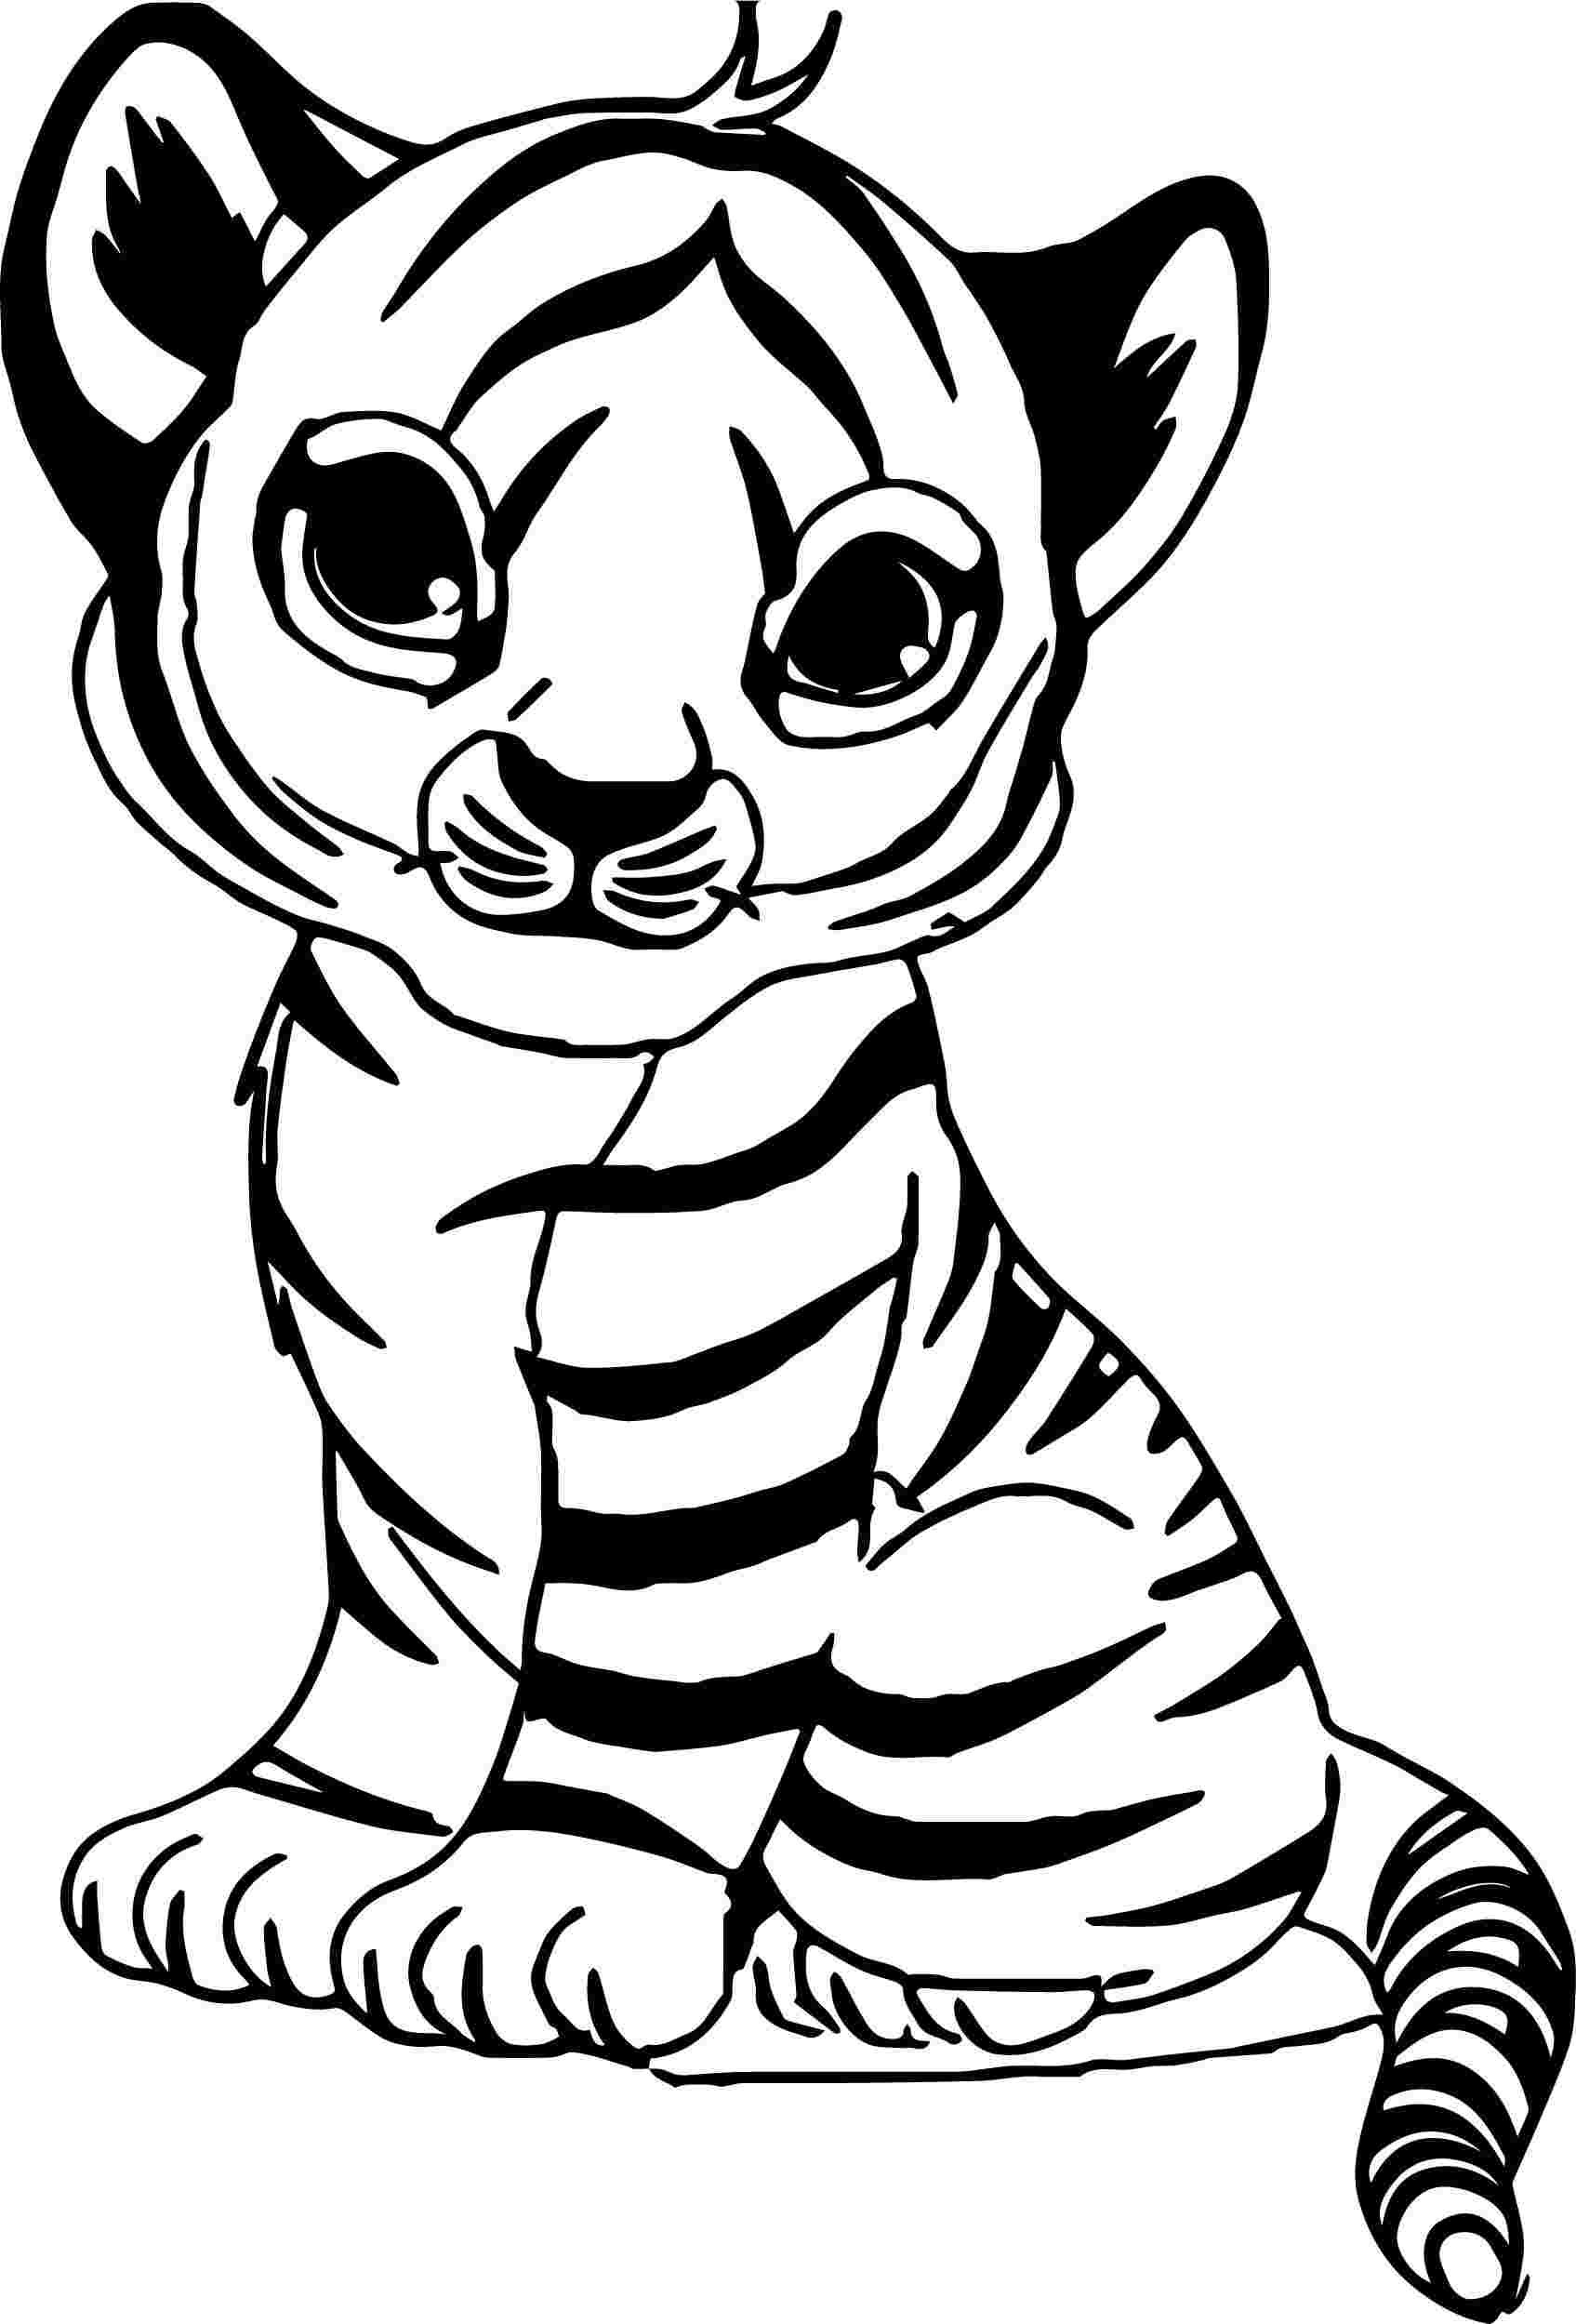 Coloring Baby Animal Luxury Sheets Cute Cute Baby Animal Coloring Pages  Coloring Pages Cute Animal Pictures To Print Printable Baby Animal Pictures  Cute Baby Animals To Color I Trust Coloring Pages. -